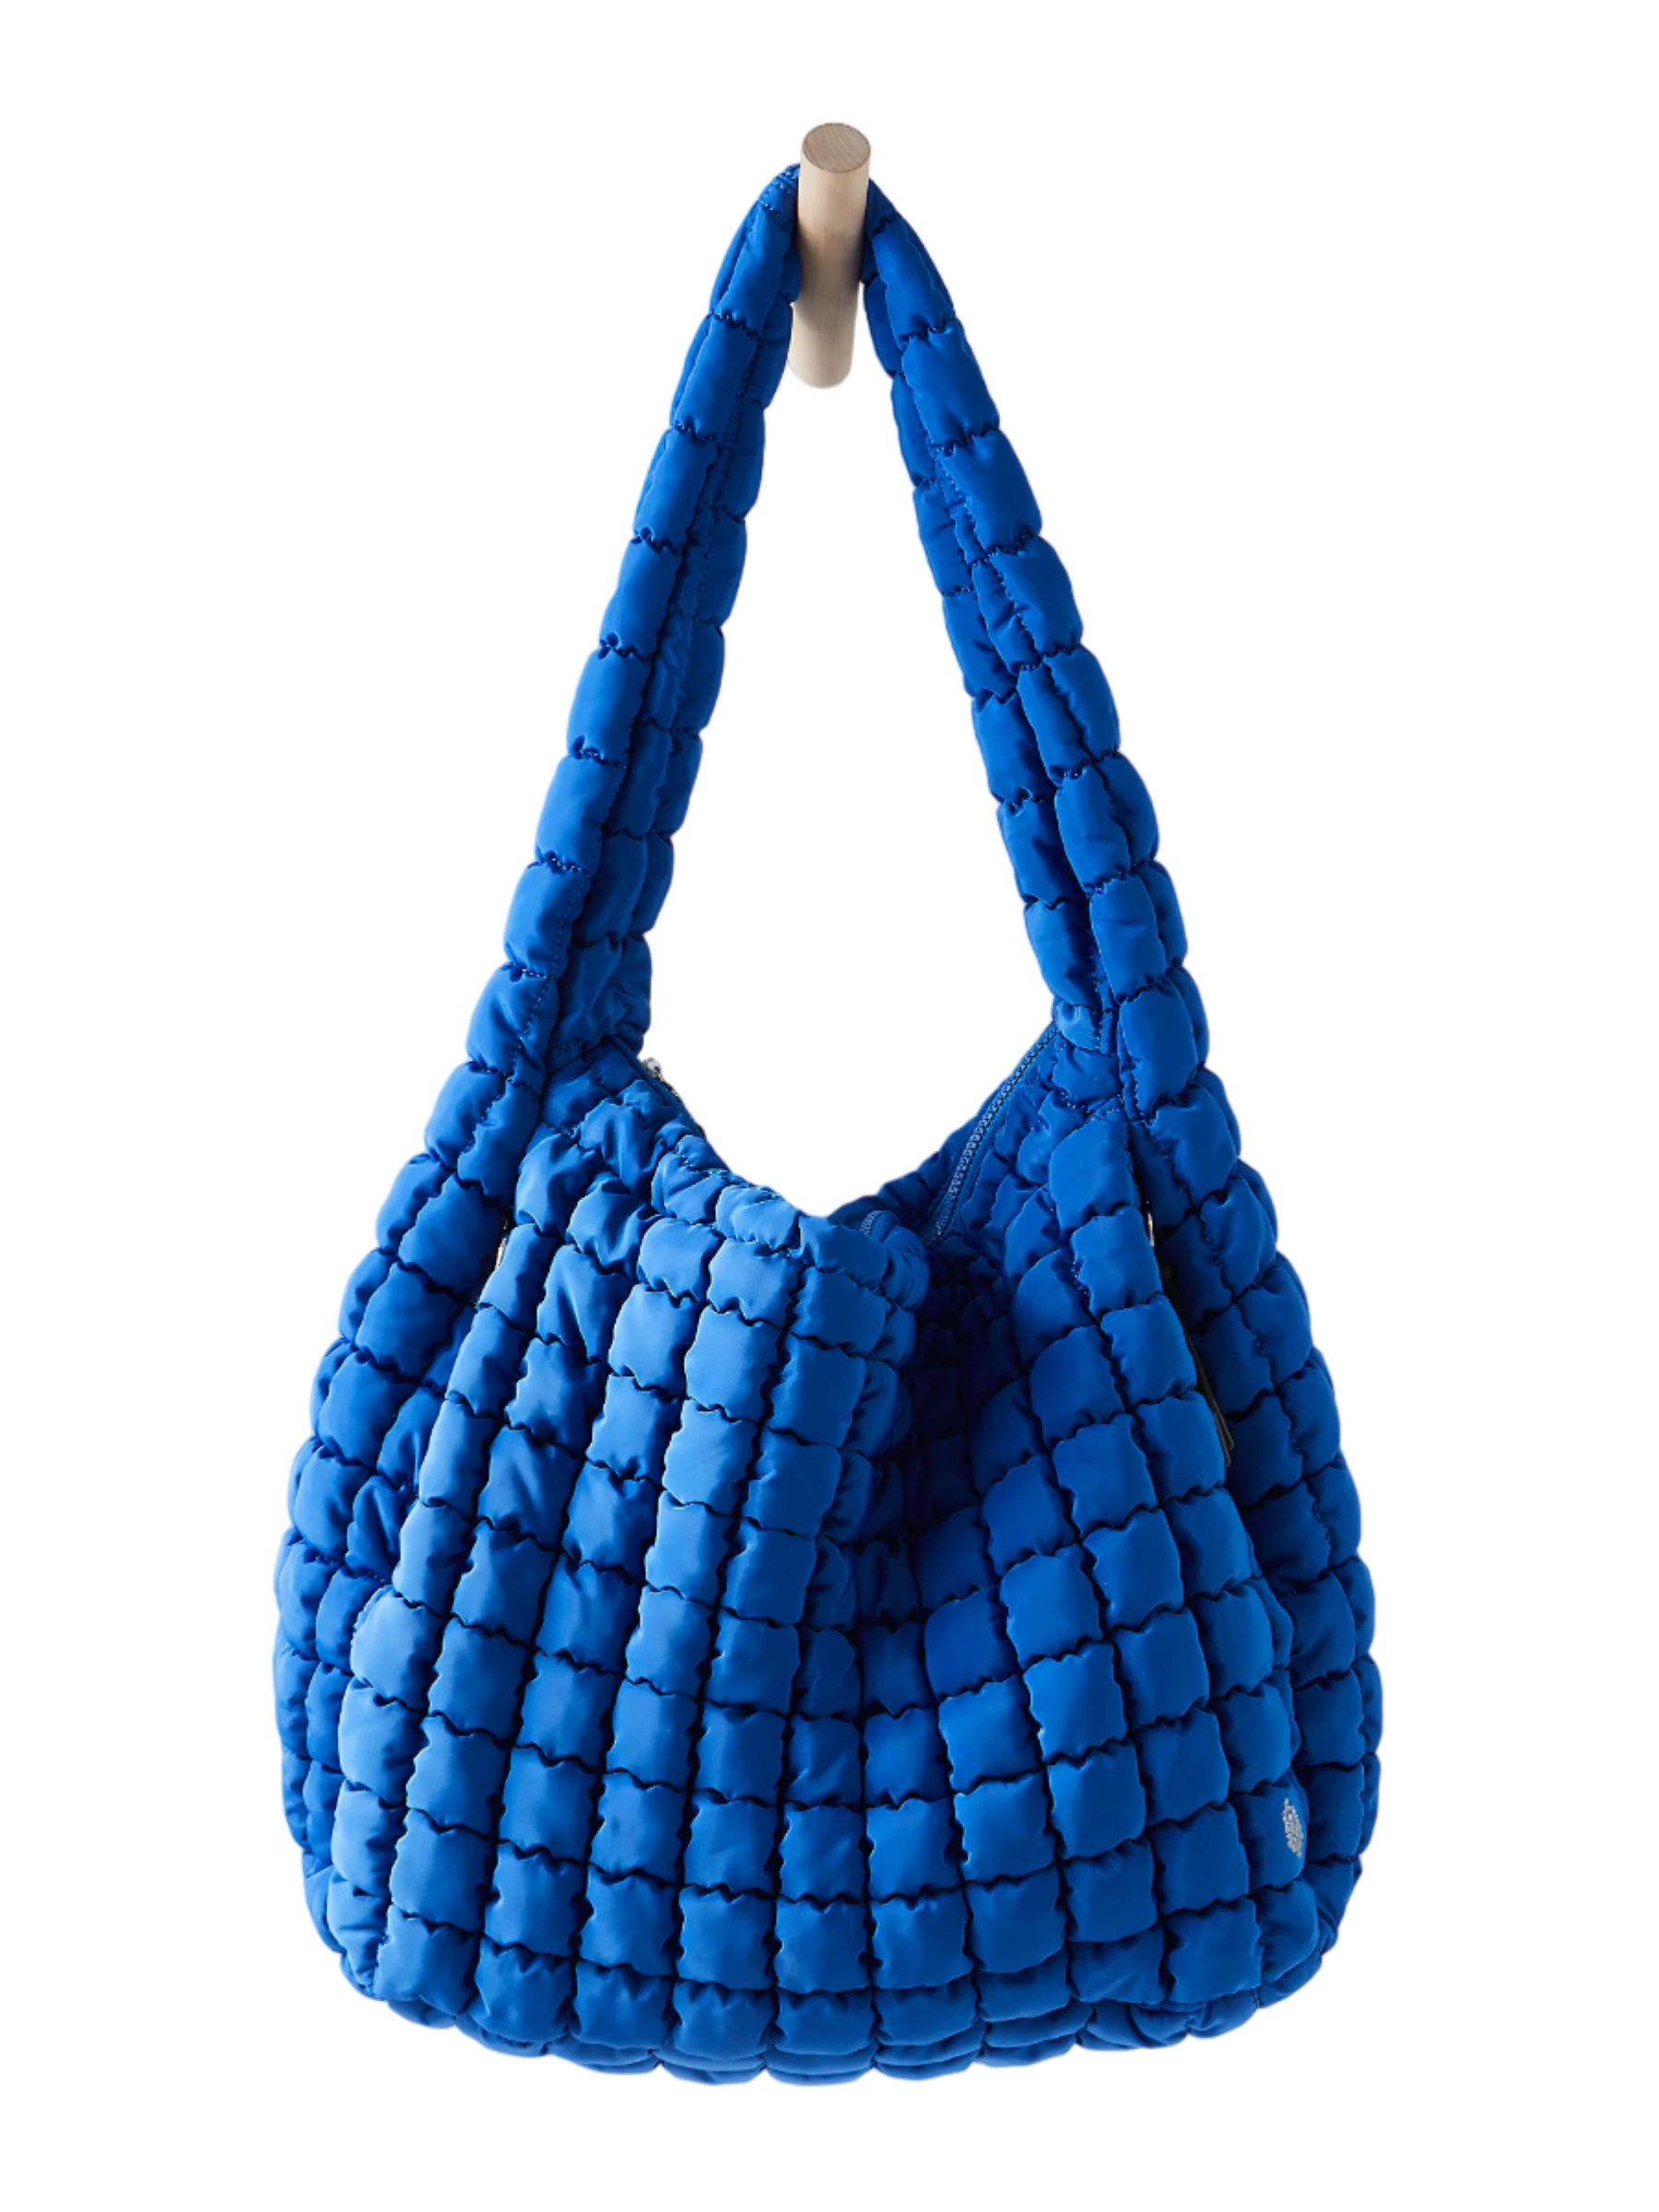 More stylish than a traditional gym duffle and not as casual as a backpack, this quilted carryall will cover all bases. It comes in nine colors and is large enough for a laptop, yoga mat, and plenty more. $68, Free People. <a href="https://www.freepeople.com/fpmovement/shop/fp-movement-quilted-carryall/?">Get it now!</a><p>Sign up for today’s biggest stories, from pop culture to politics.</p><a href="https://www.glamour.com/newsletter/news?sourceCode=msnsend">Sign Up</a>